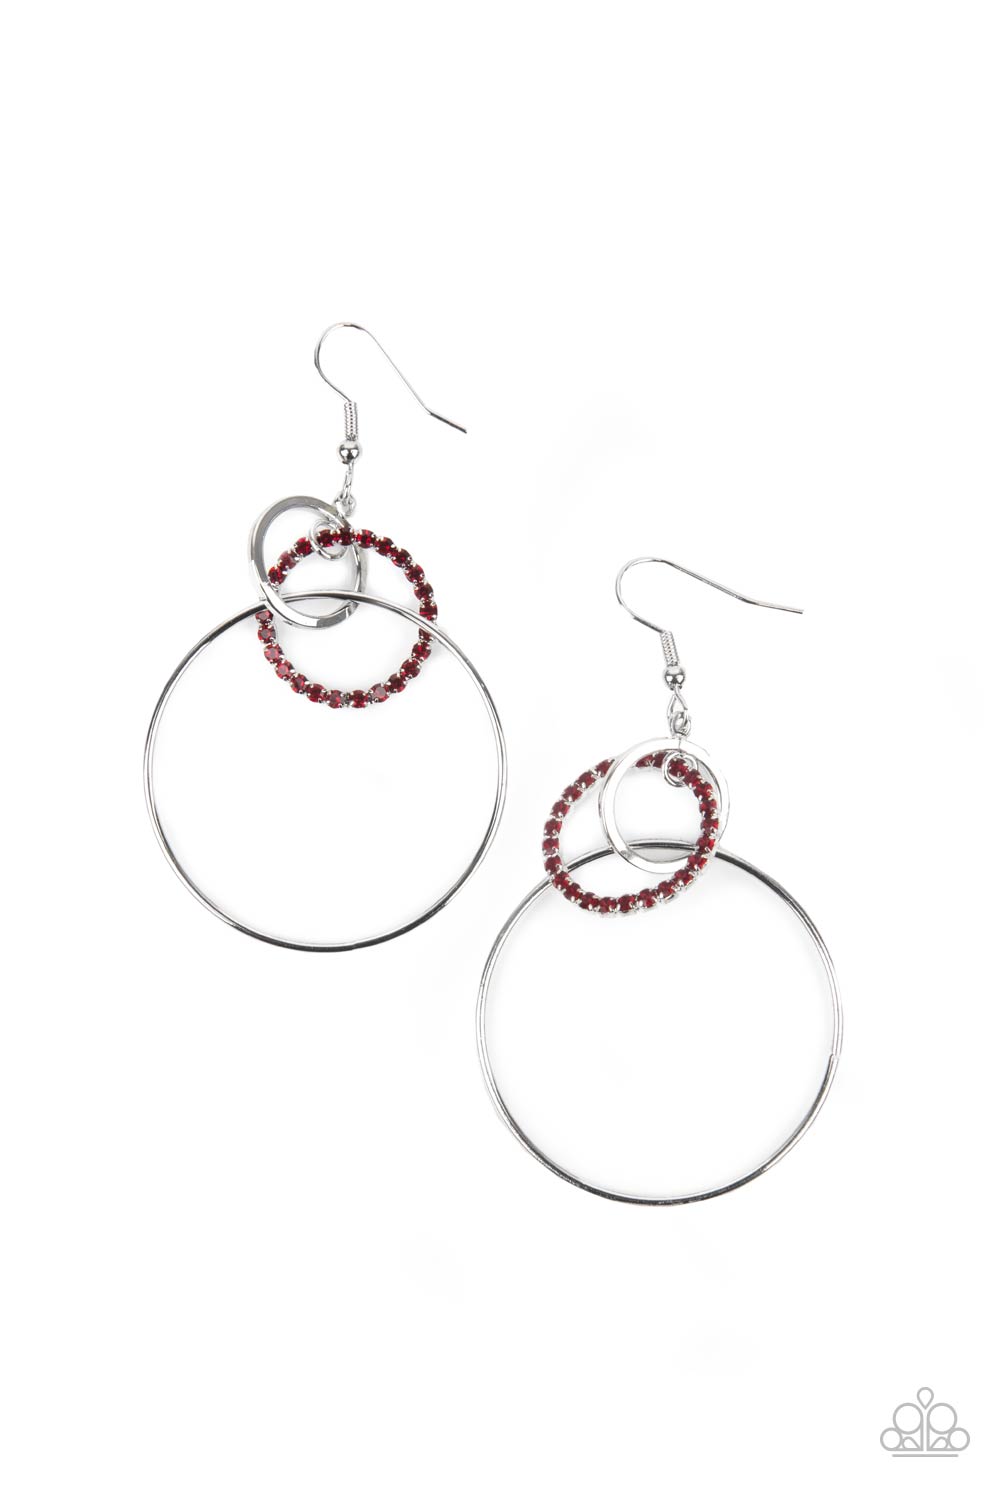 In An Orderly Fashion Earrings  Red